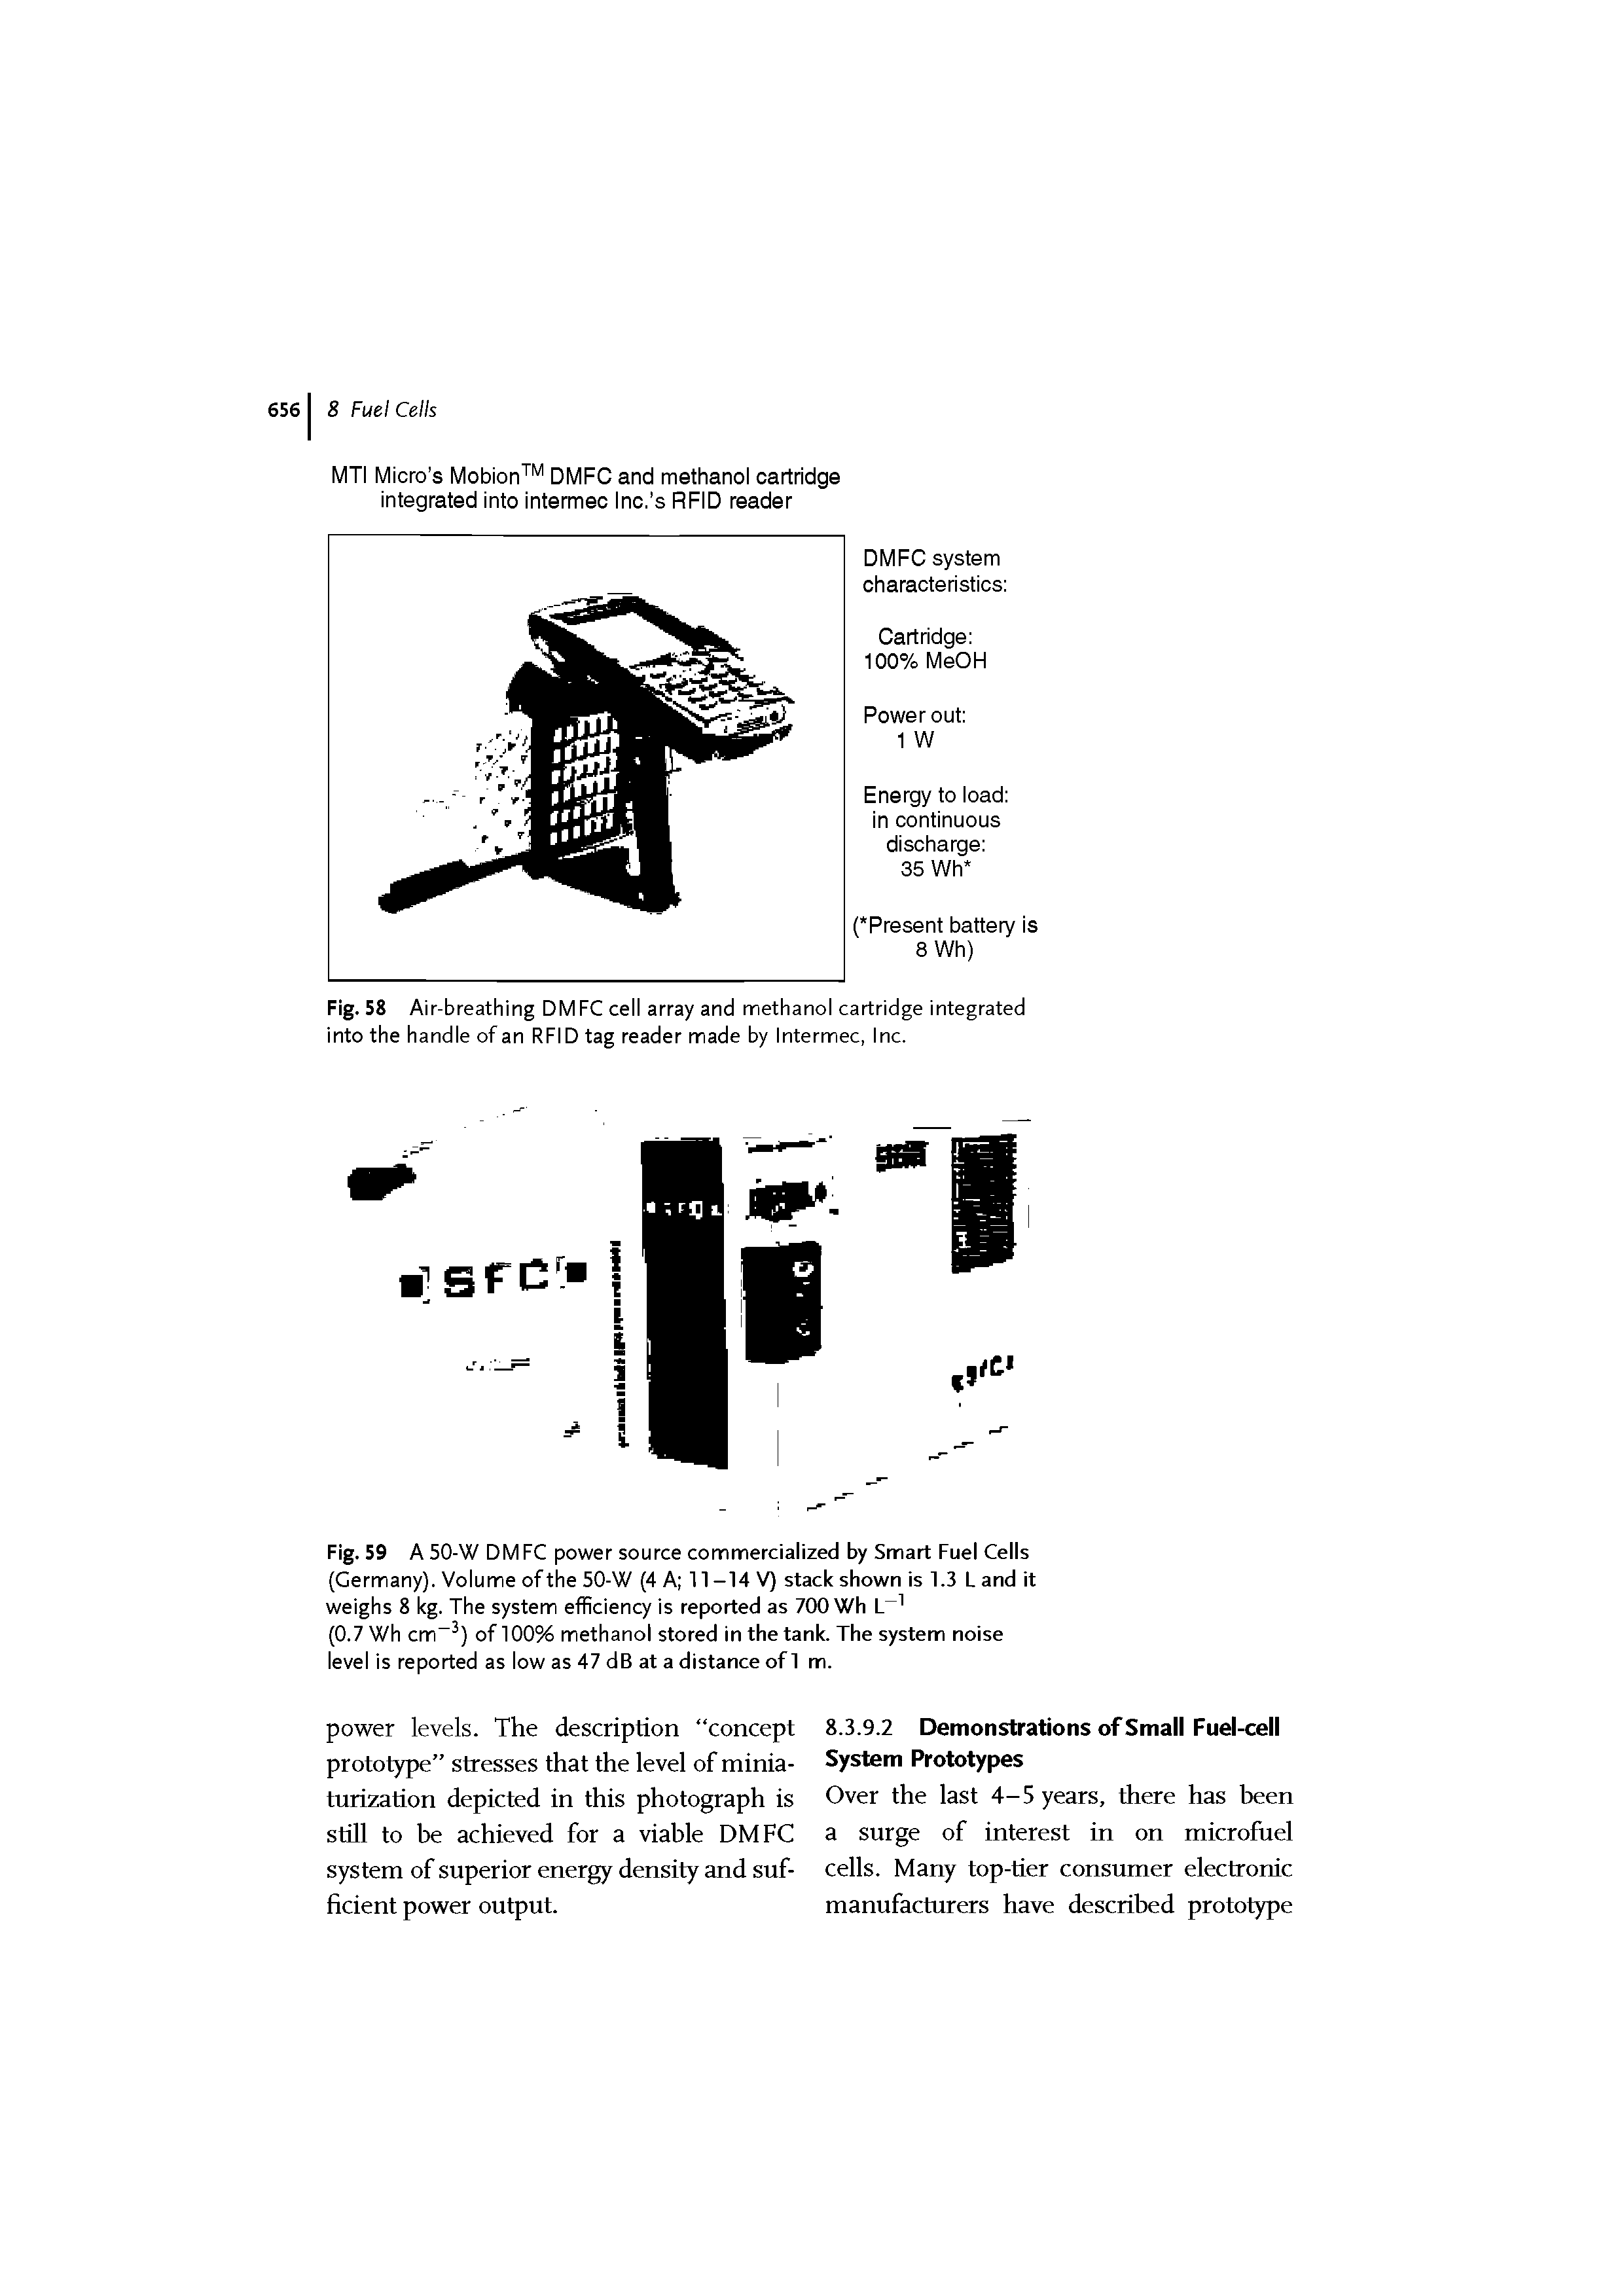 Fig. 59 A 50-W DMFC power source commercialized by Smart Fuel Cells (Germany). Volume of the 50-W (4 A 11 -14 V) stack shown is 1.3 L and it weighs 8 kg. The system efficiency is reported as 700 Wh L 1 (0.7 Wh cm-3) of 100% methanol stored in the tank. The system noise level is reported as low as 47 dB at a distance of 1 m.